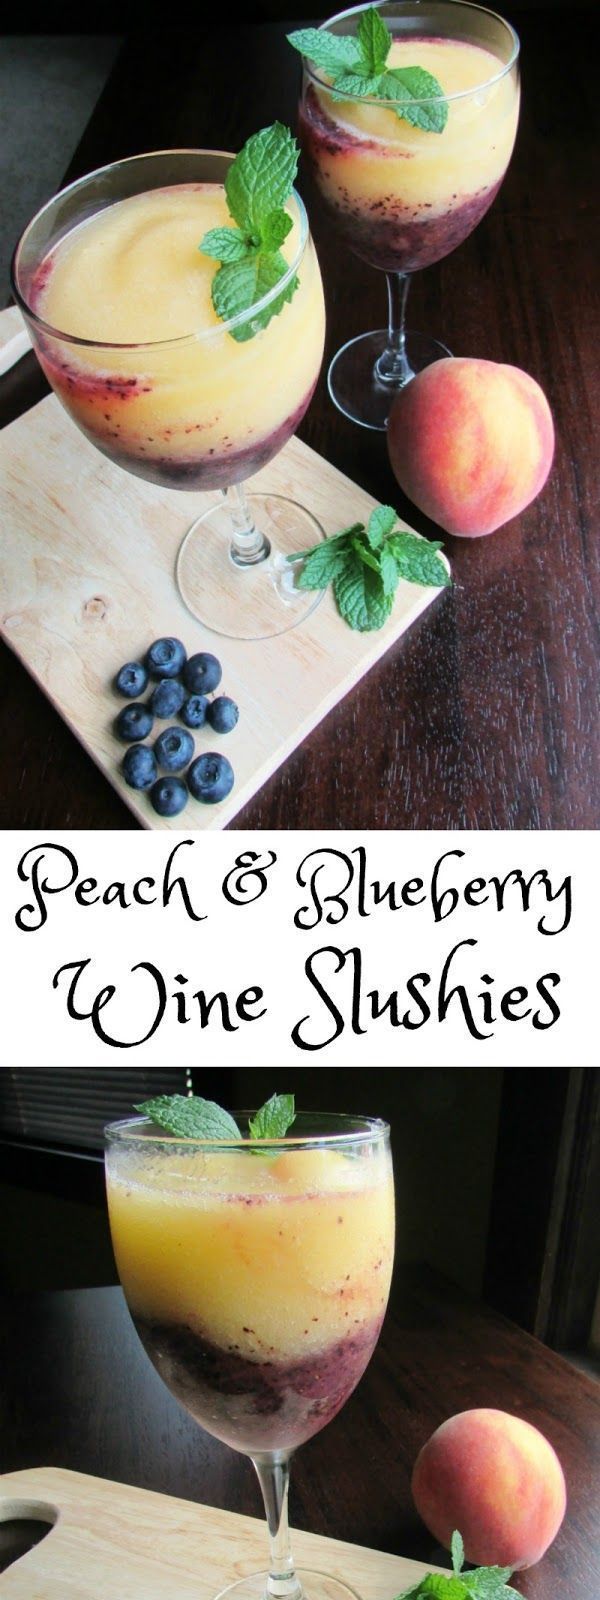 These Peach and Blueberry Wine Slushies are perfect for sipping on a hot summer’s day.  They come together in a minute and take